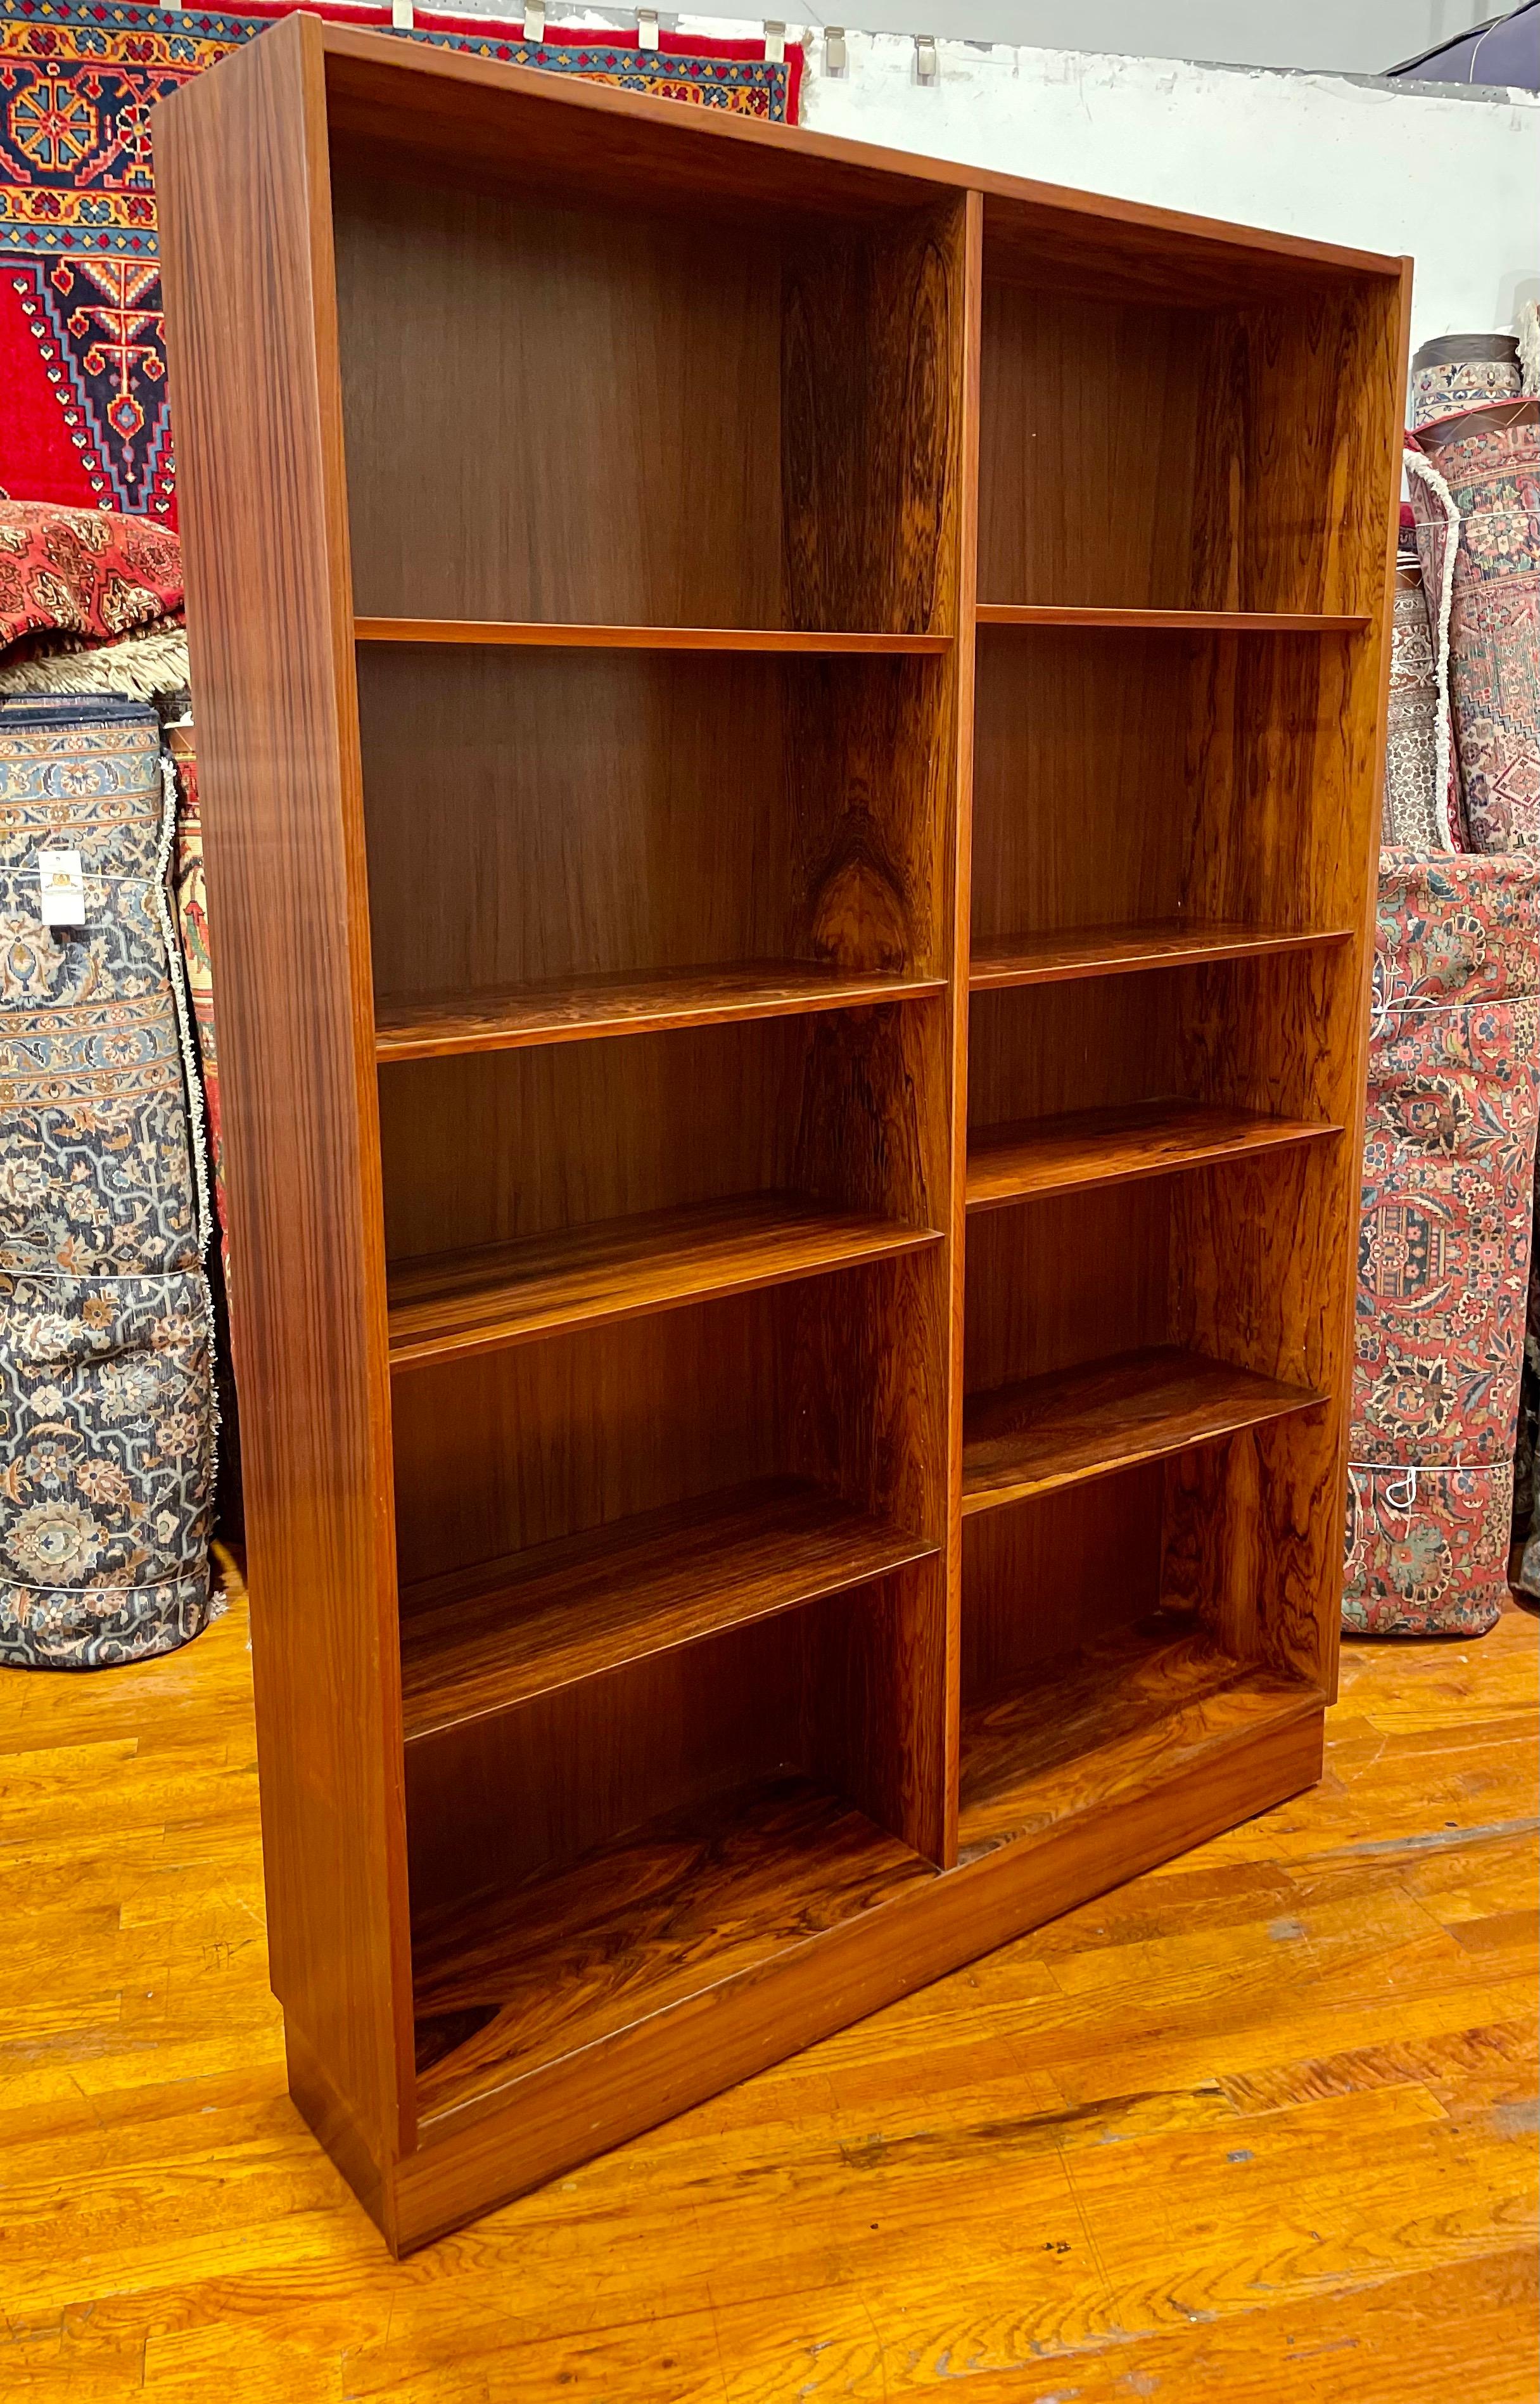 Beautiful elegant rosewood Danish large bookcase, circa 1960's design by Poul Hundevad beautiful grain, nice beveled edge multiple adjustable shelves, nice clean original condition with stamped in the back.